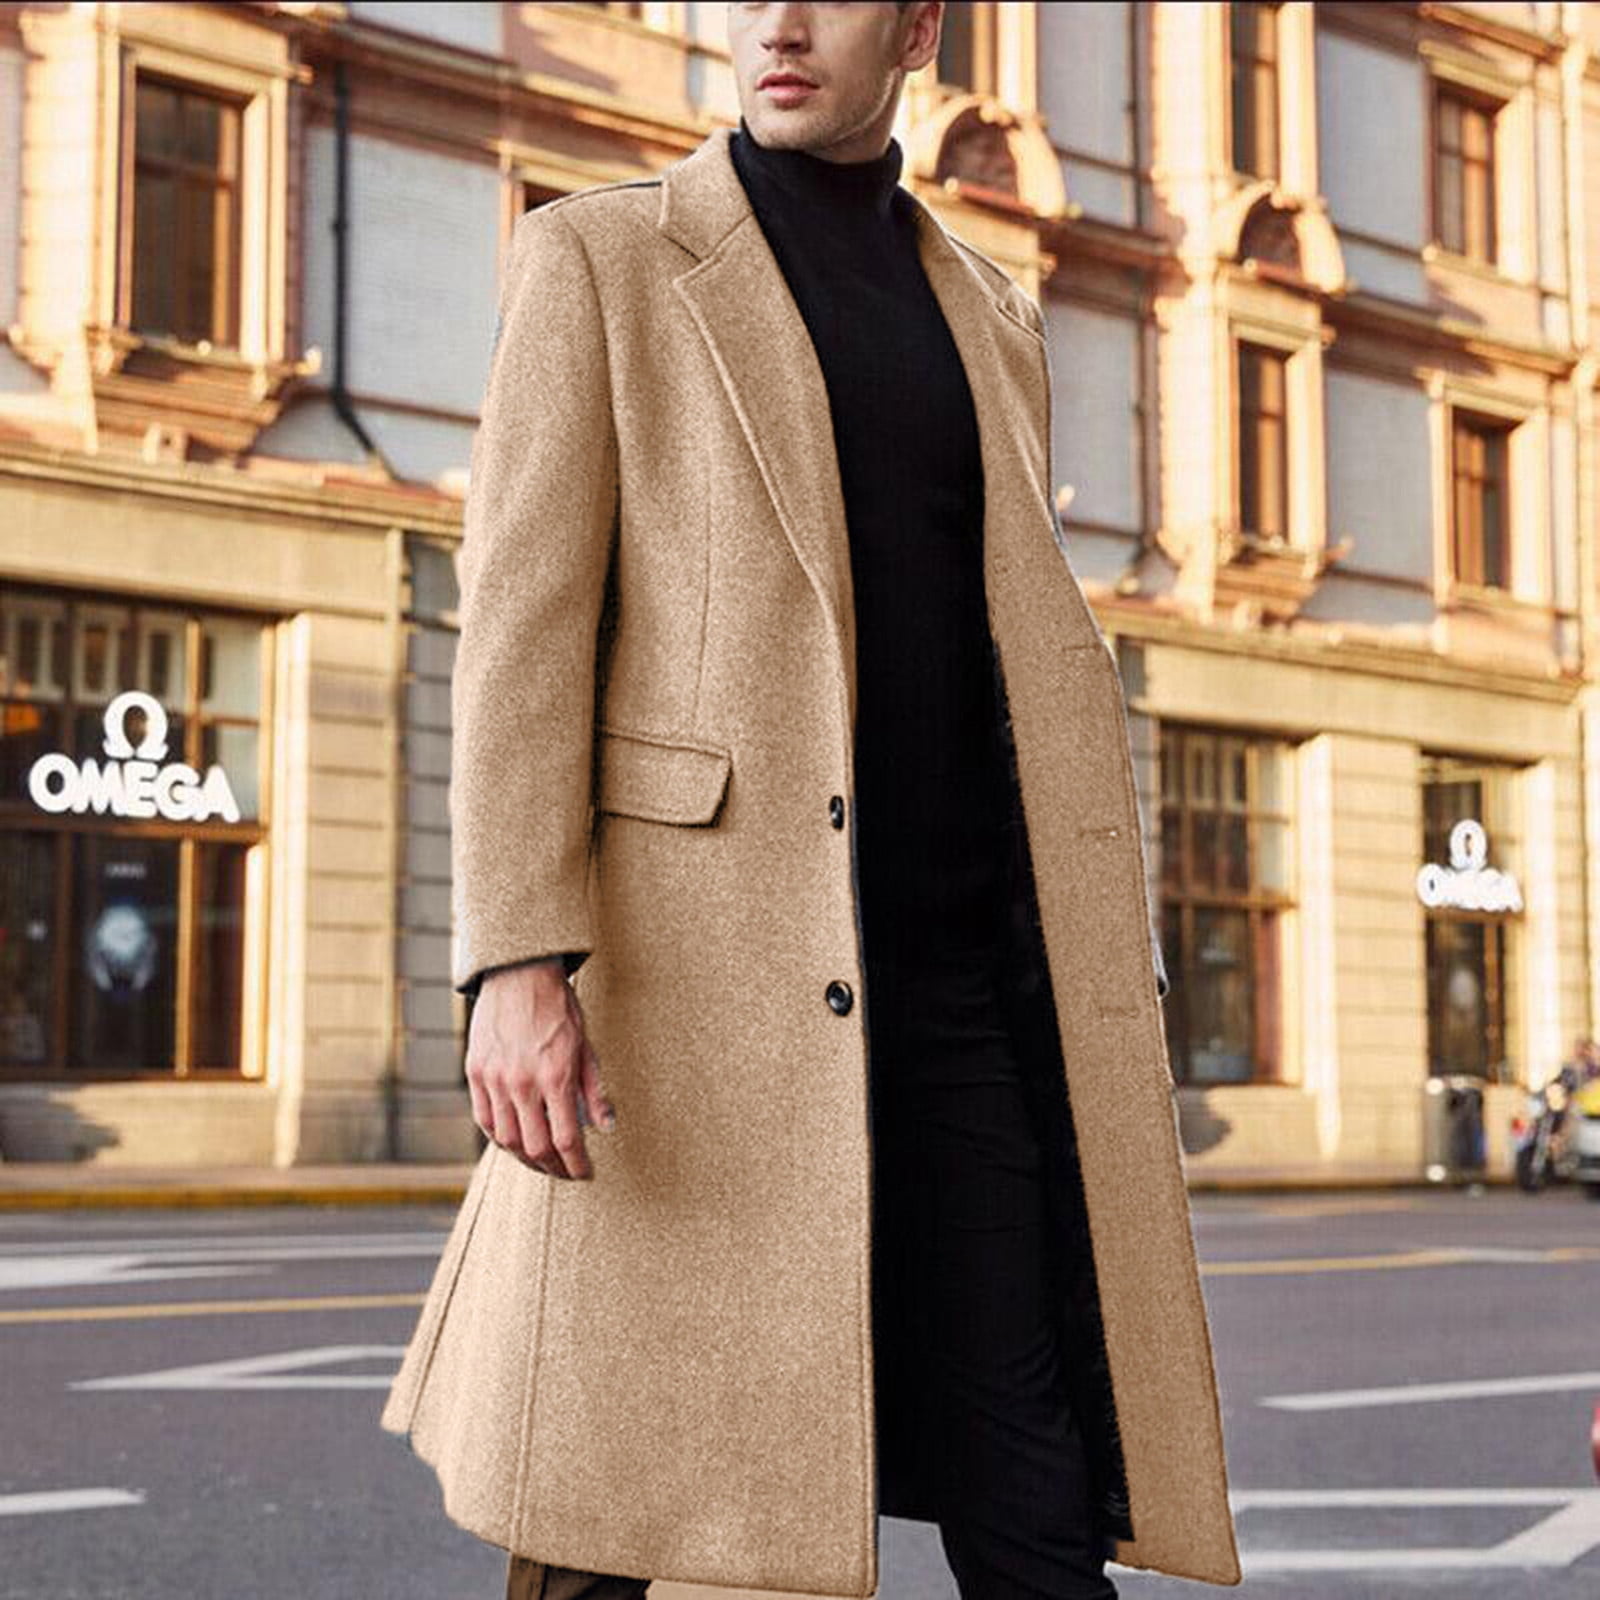 Camel Coat Outfit Mens | lupon.gov.ph